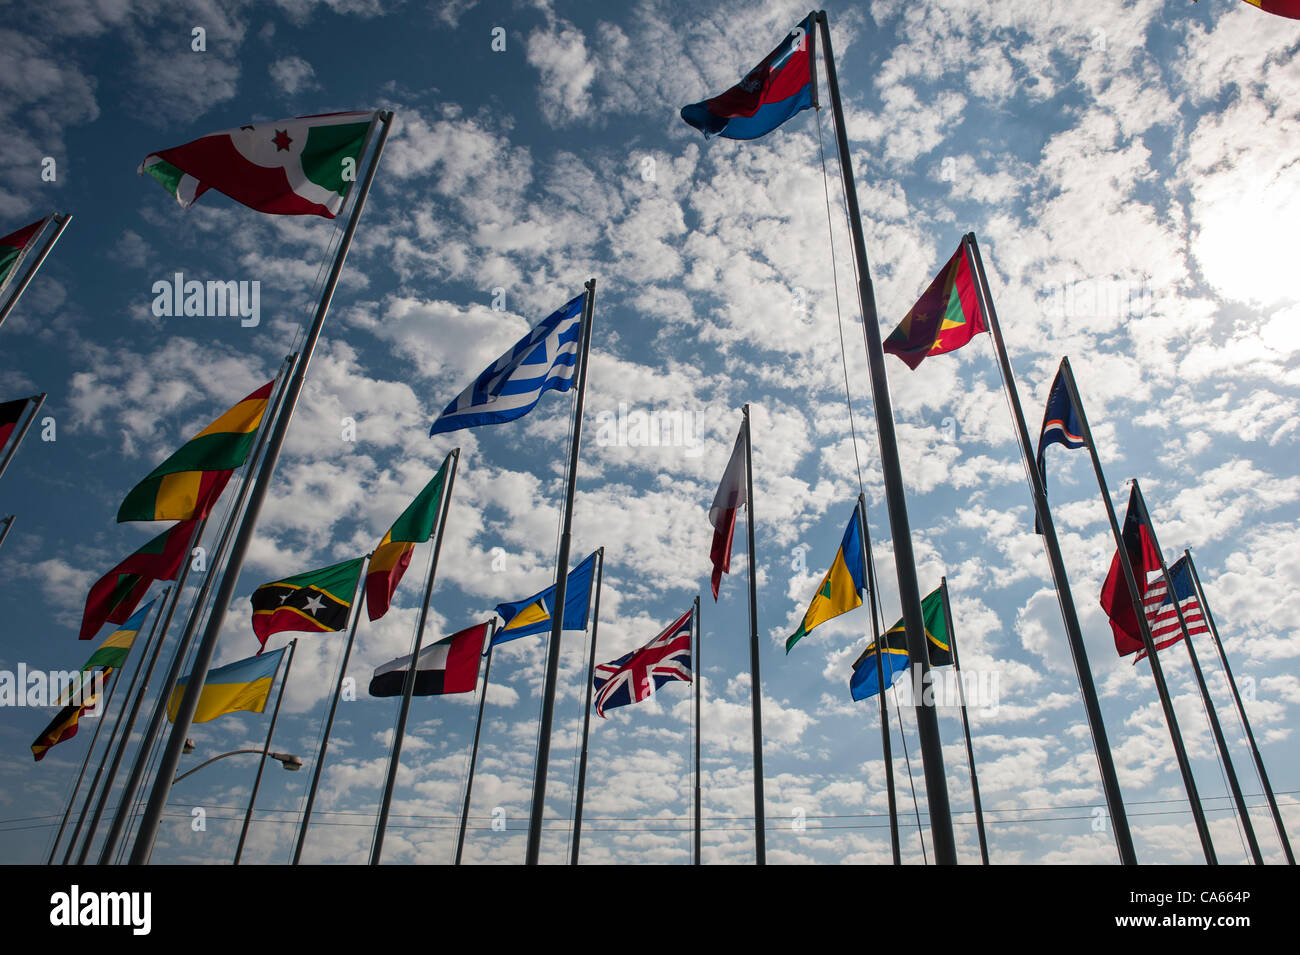 Rio de Janeiro, Brazil, Flags of several nations including the United Kingdom in the grounds of the Rio Centre conference venue. Photo © Sue Cunningham. Stock Photo